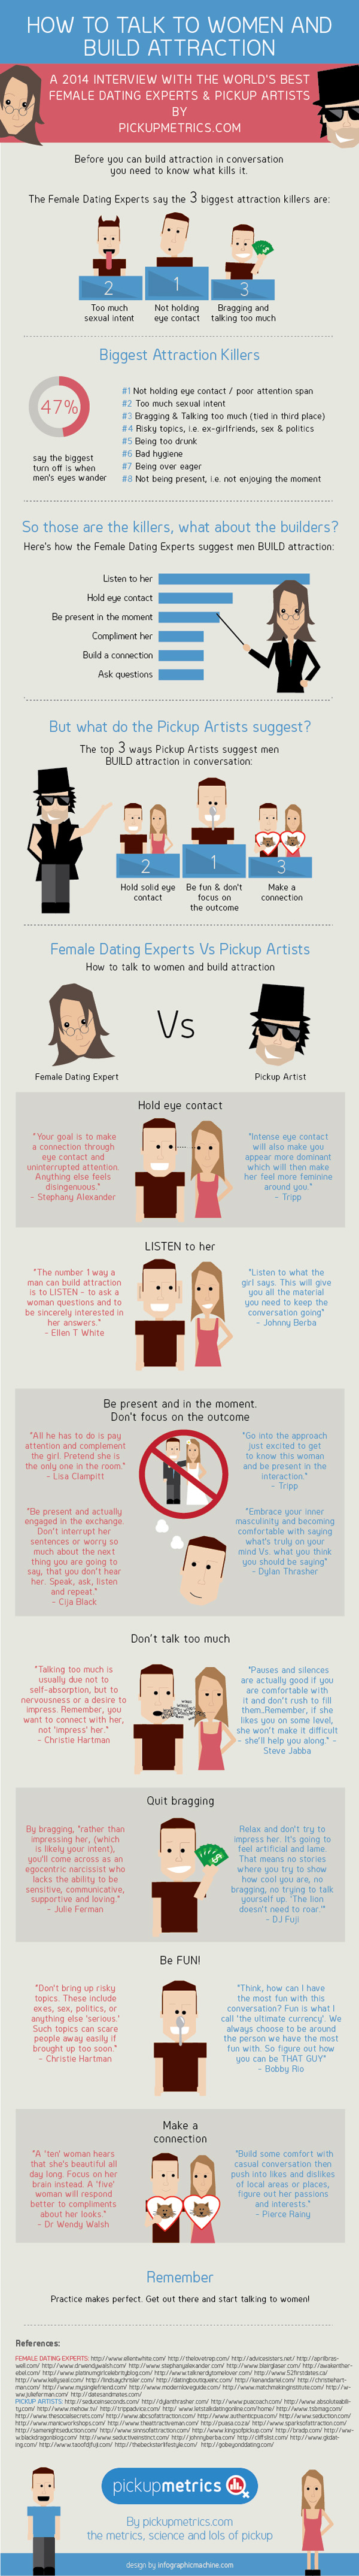 How-to-attract-women-infographic